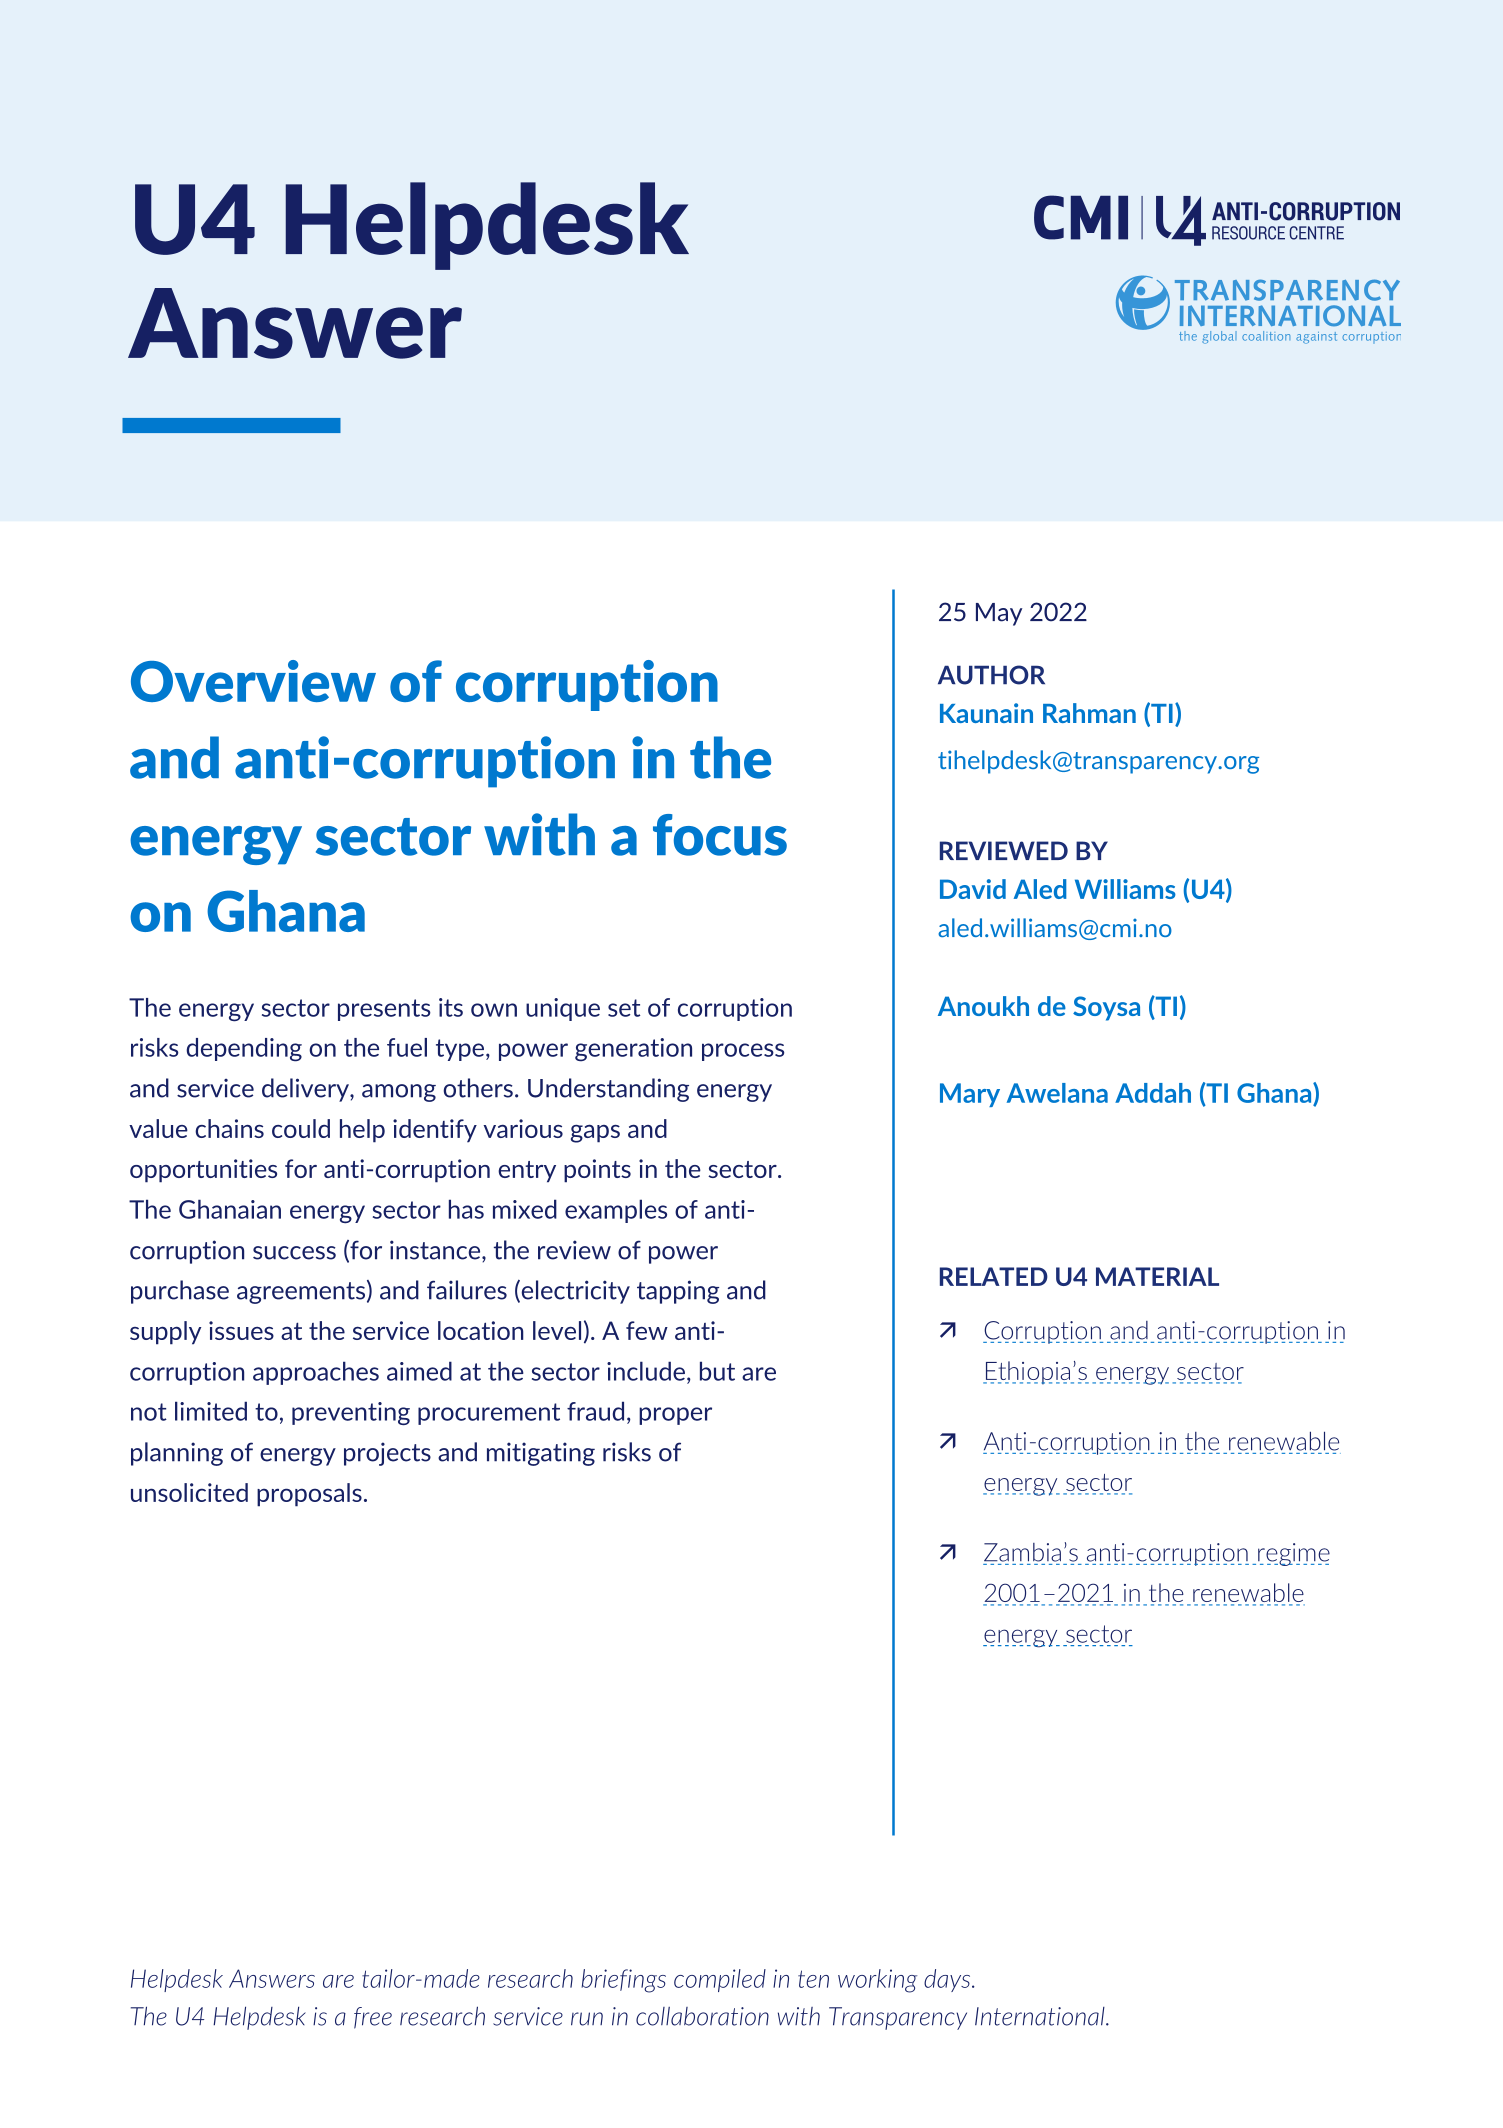 Overview of corruption and anti-corruption in the energy sector with a focus on Ghana